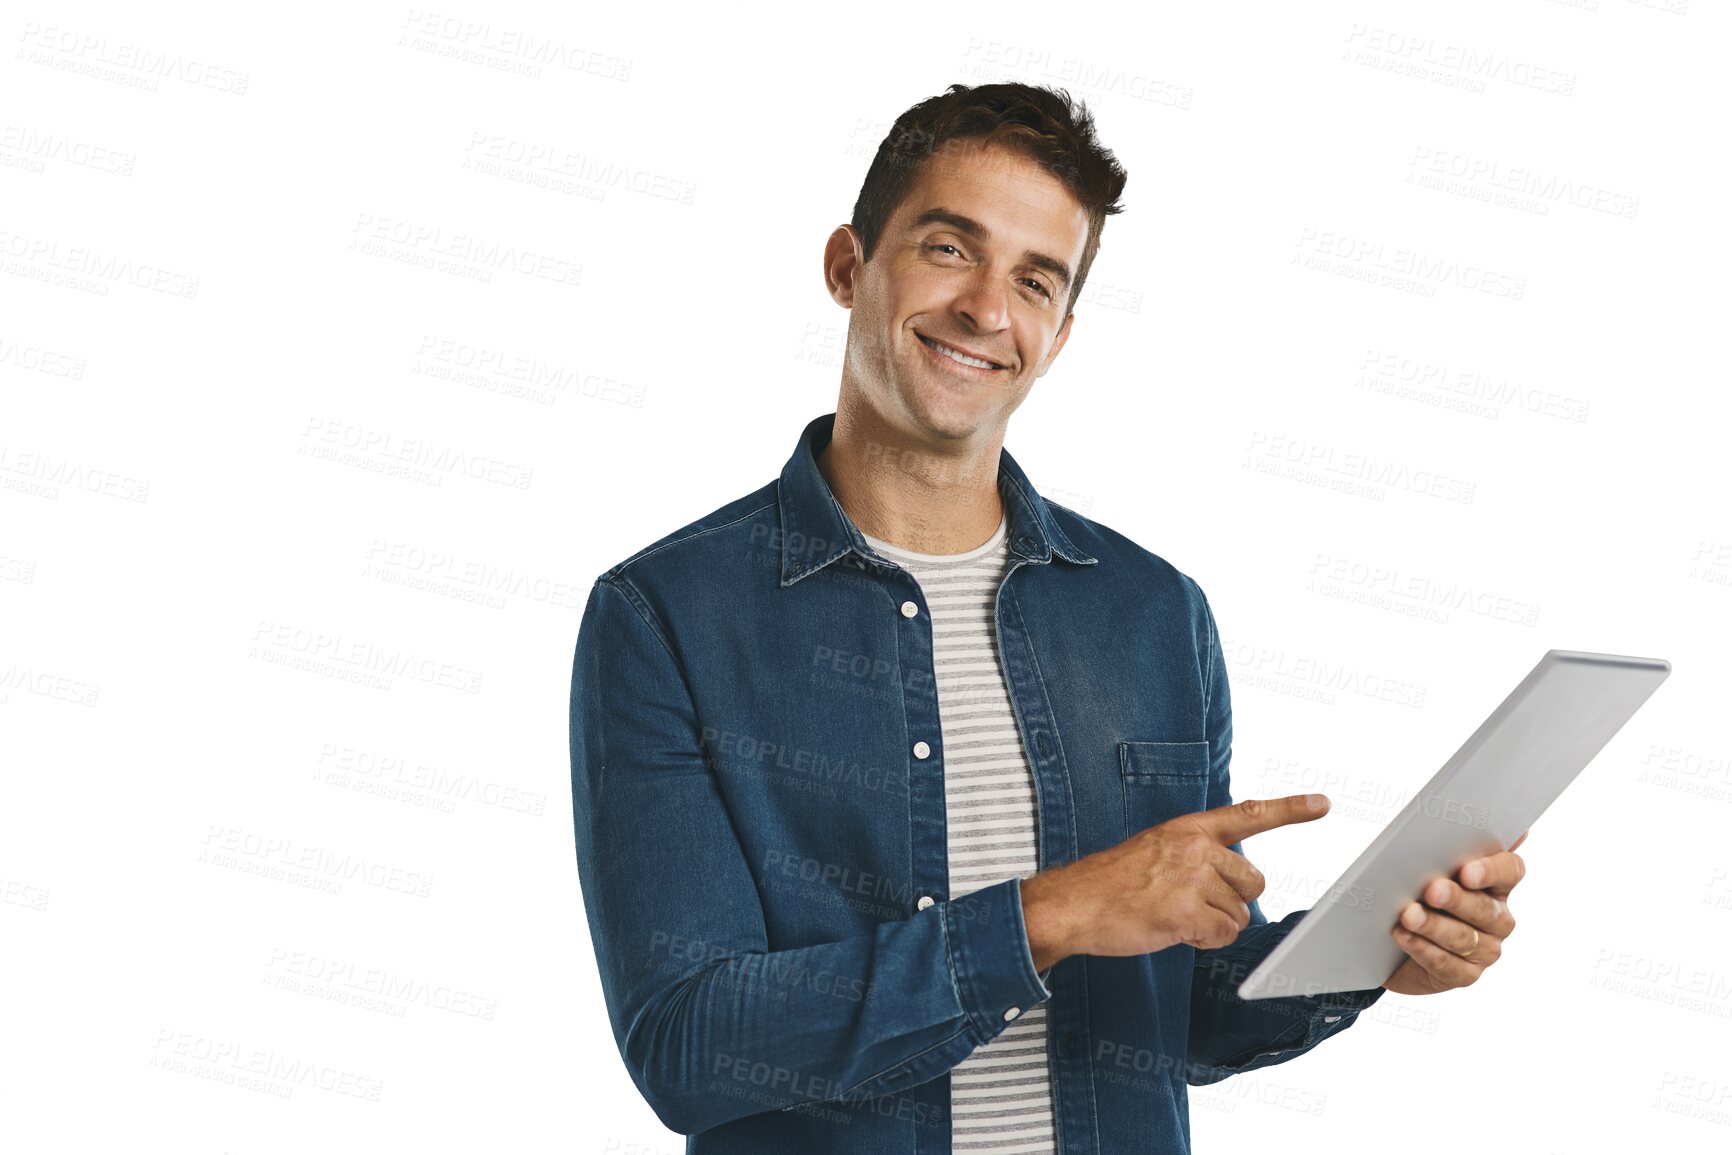 Buy stock photo Smile, tablet and portrait of man on social media, internet or pointing isolated on a transparent png background. Smartphone, face and happy person on technology, app and reading email notification